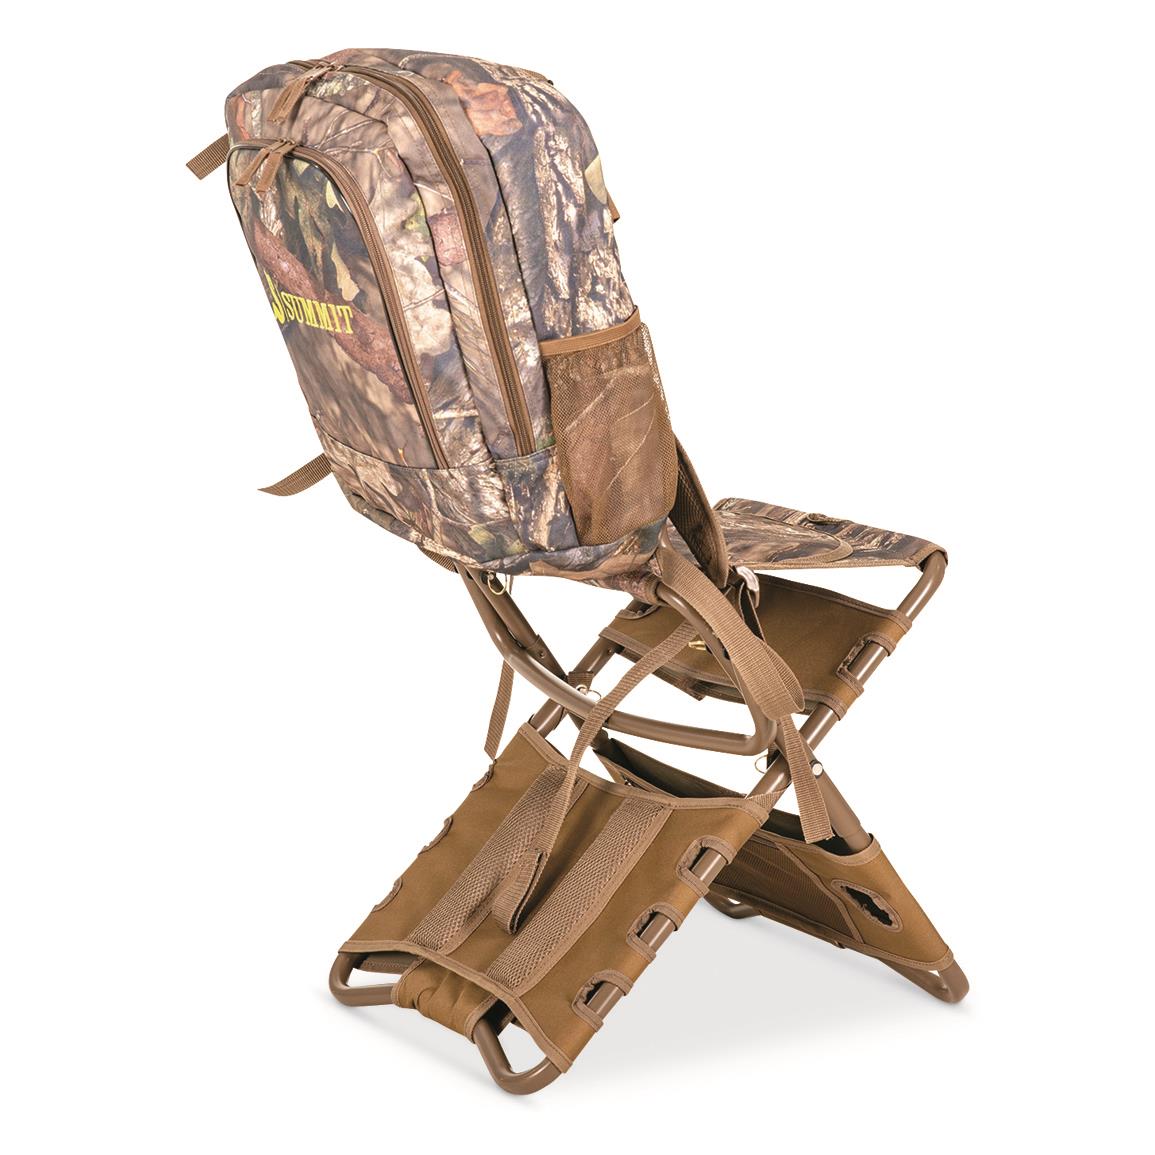 Summit Chairpack 1 5 711983 Stools Chairs Seat Cushions At Sportsman S Guide